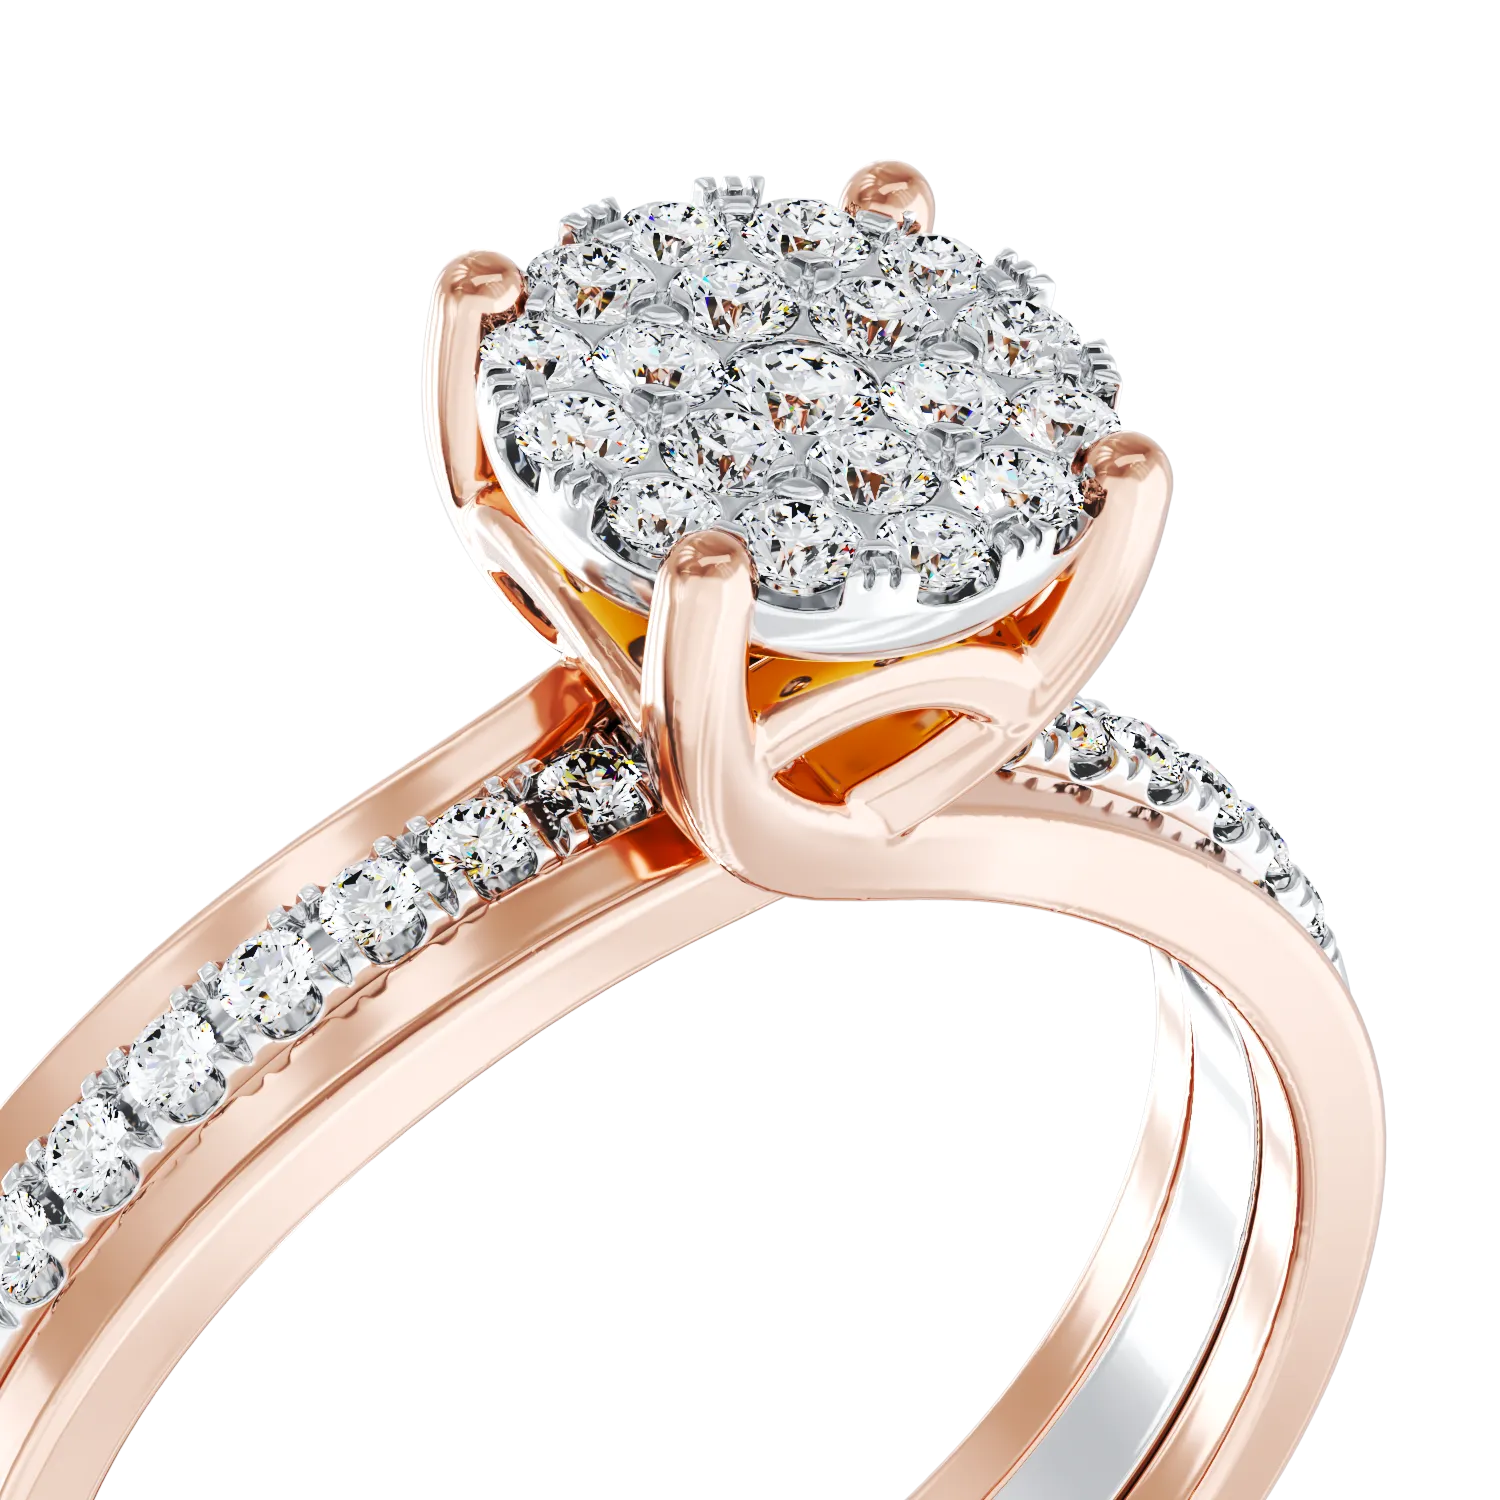 18K white-rose gold engagement ring with 0.42ct diamonds